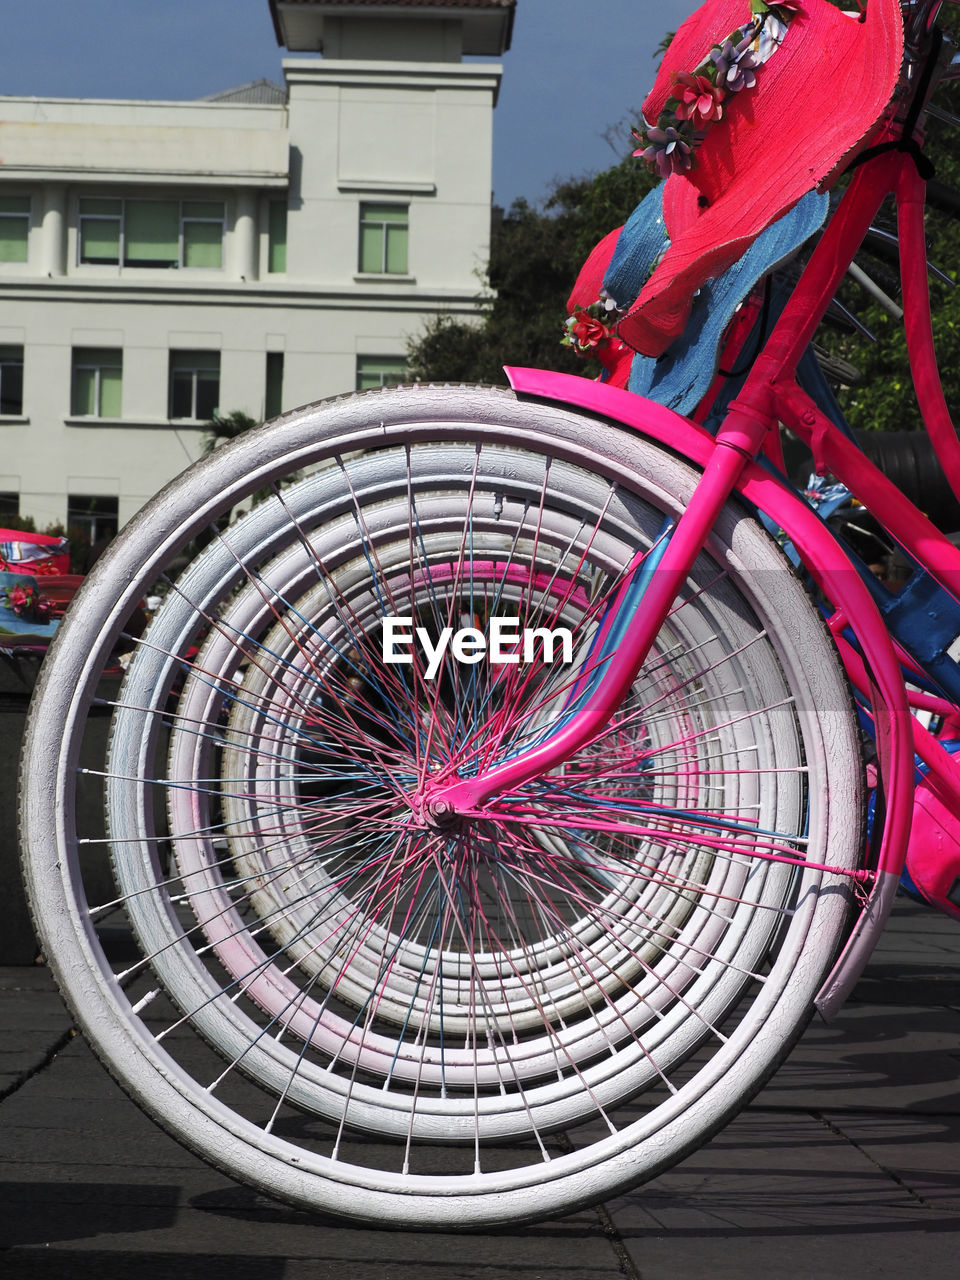 CLOSE-UP OF BICYCLE WHEEL IN CITY